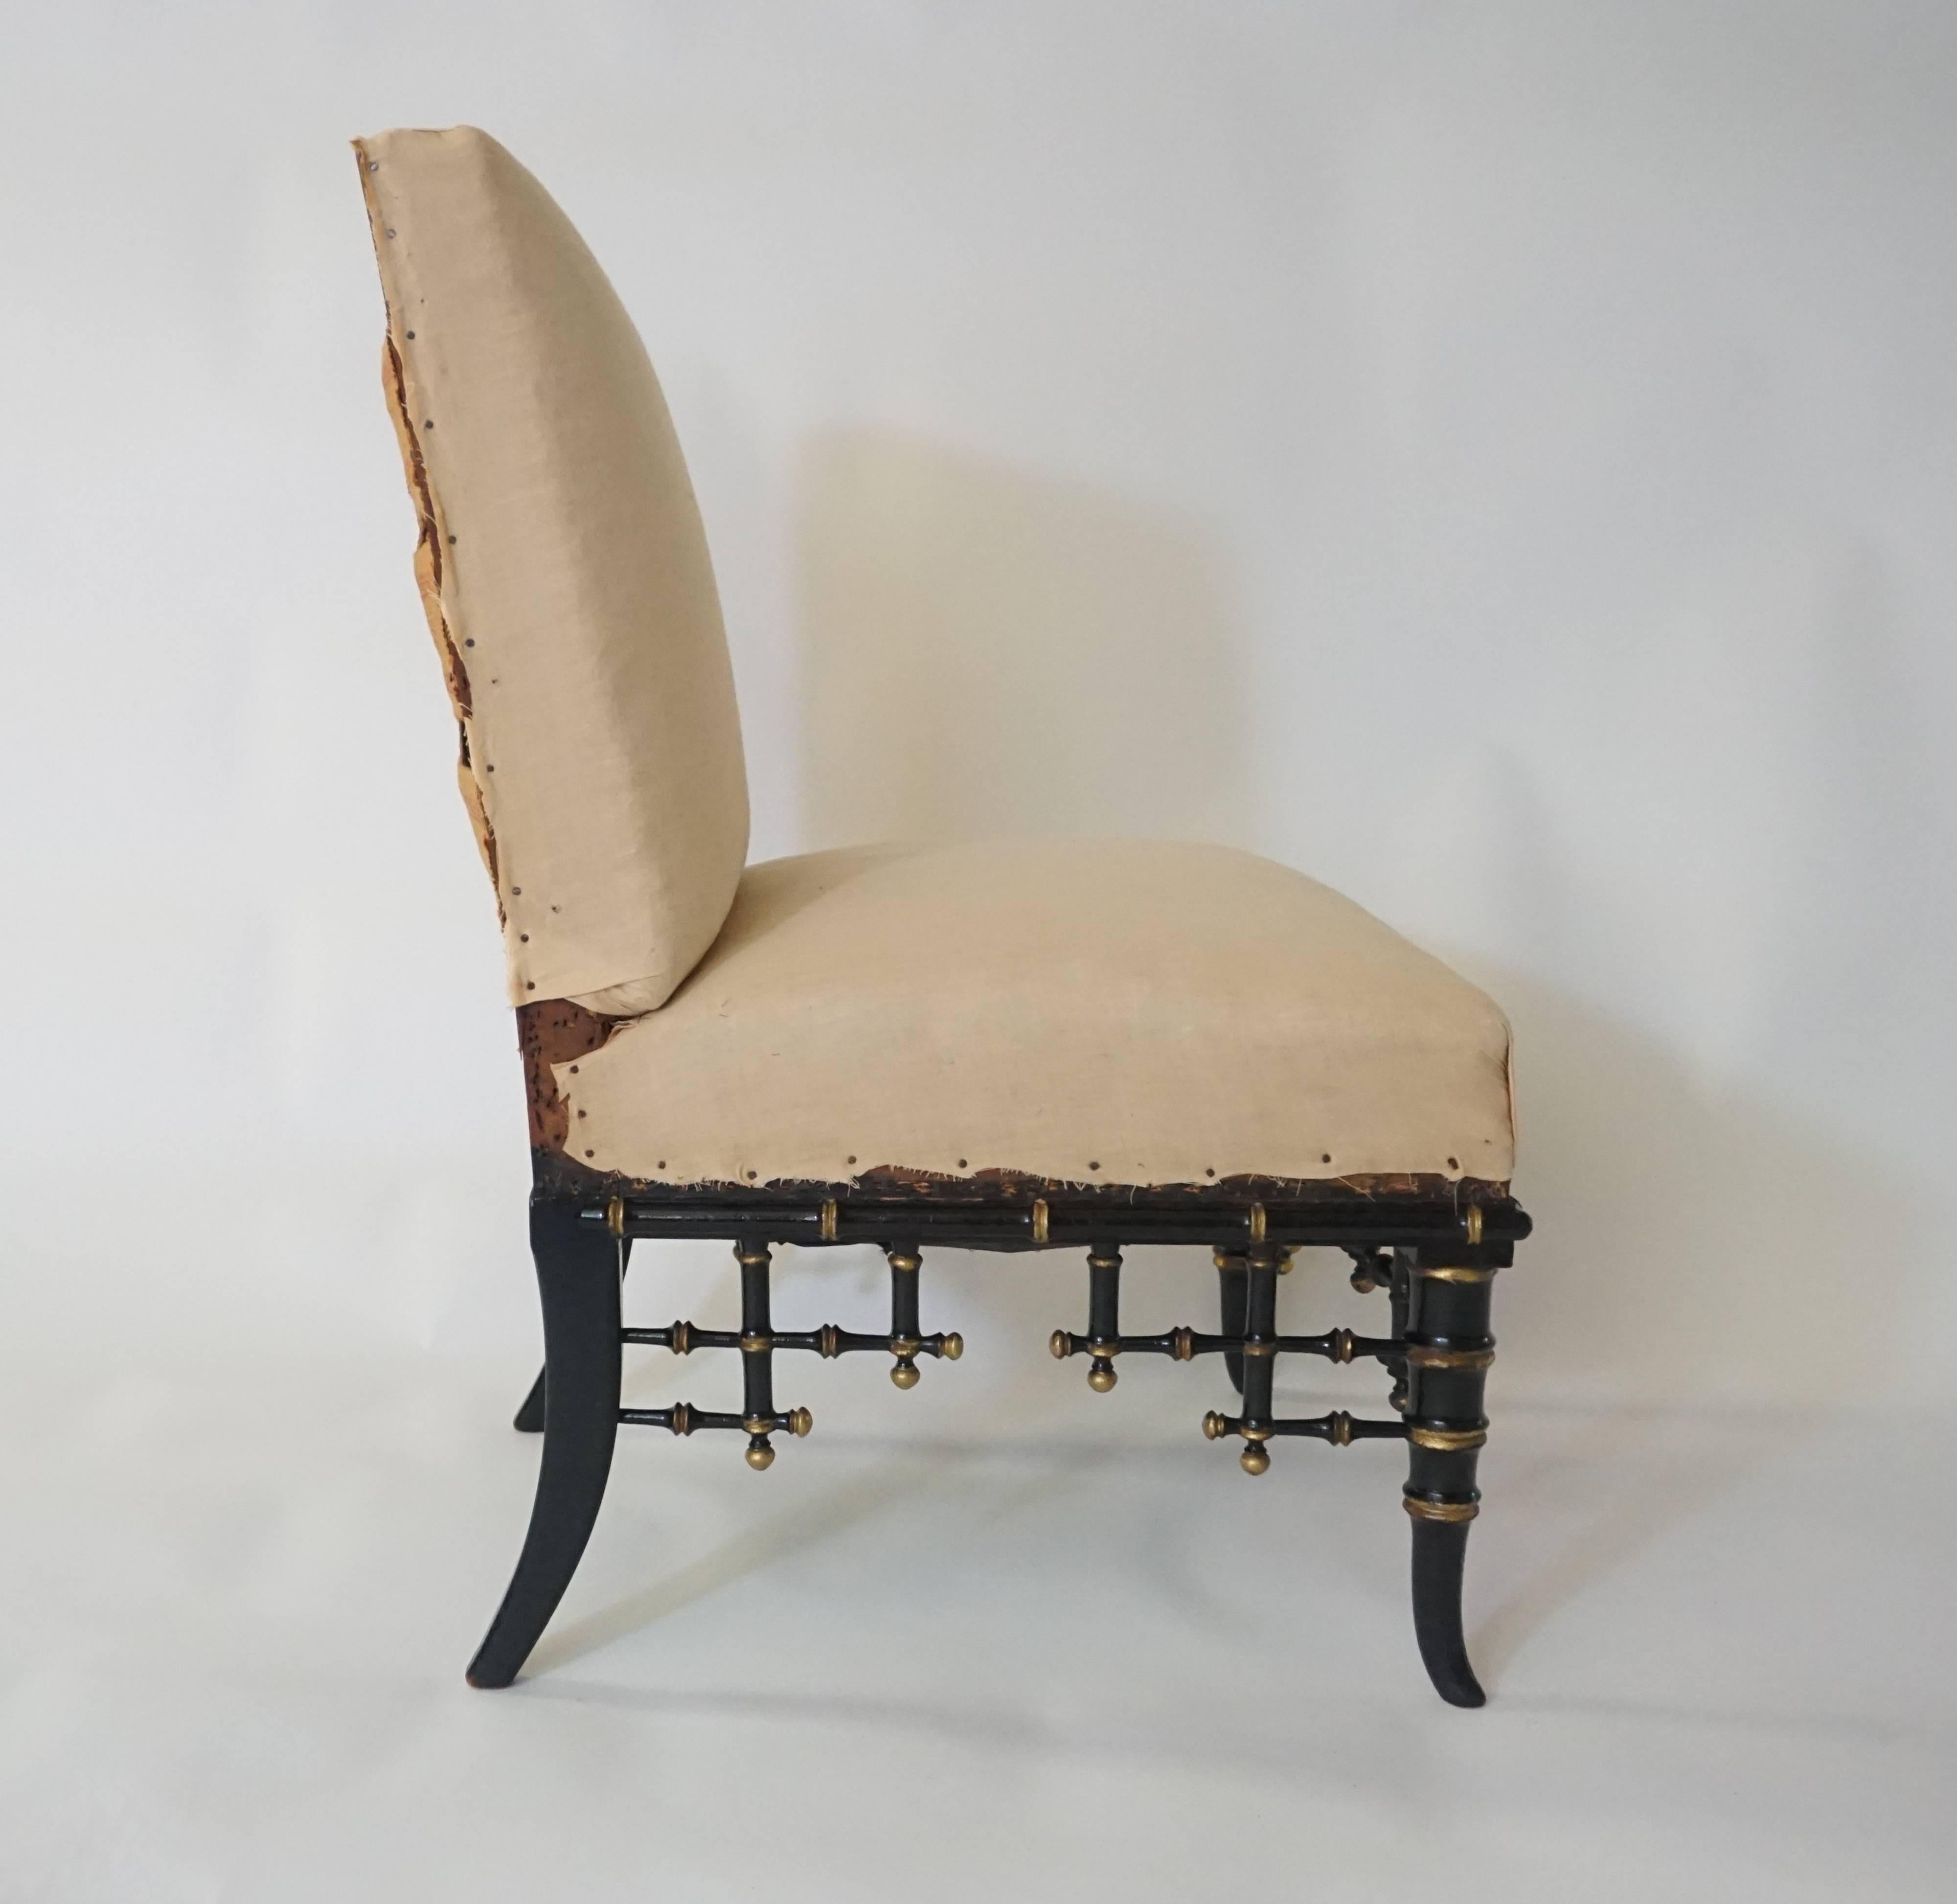 Hand-Carved French Ebonized and Parcel-Gilt Faux Bamboo Slipper Chair